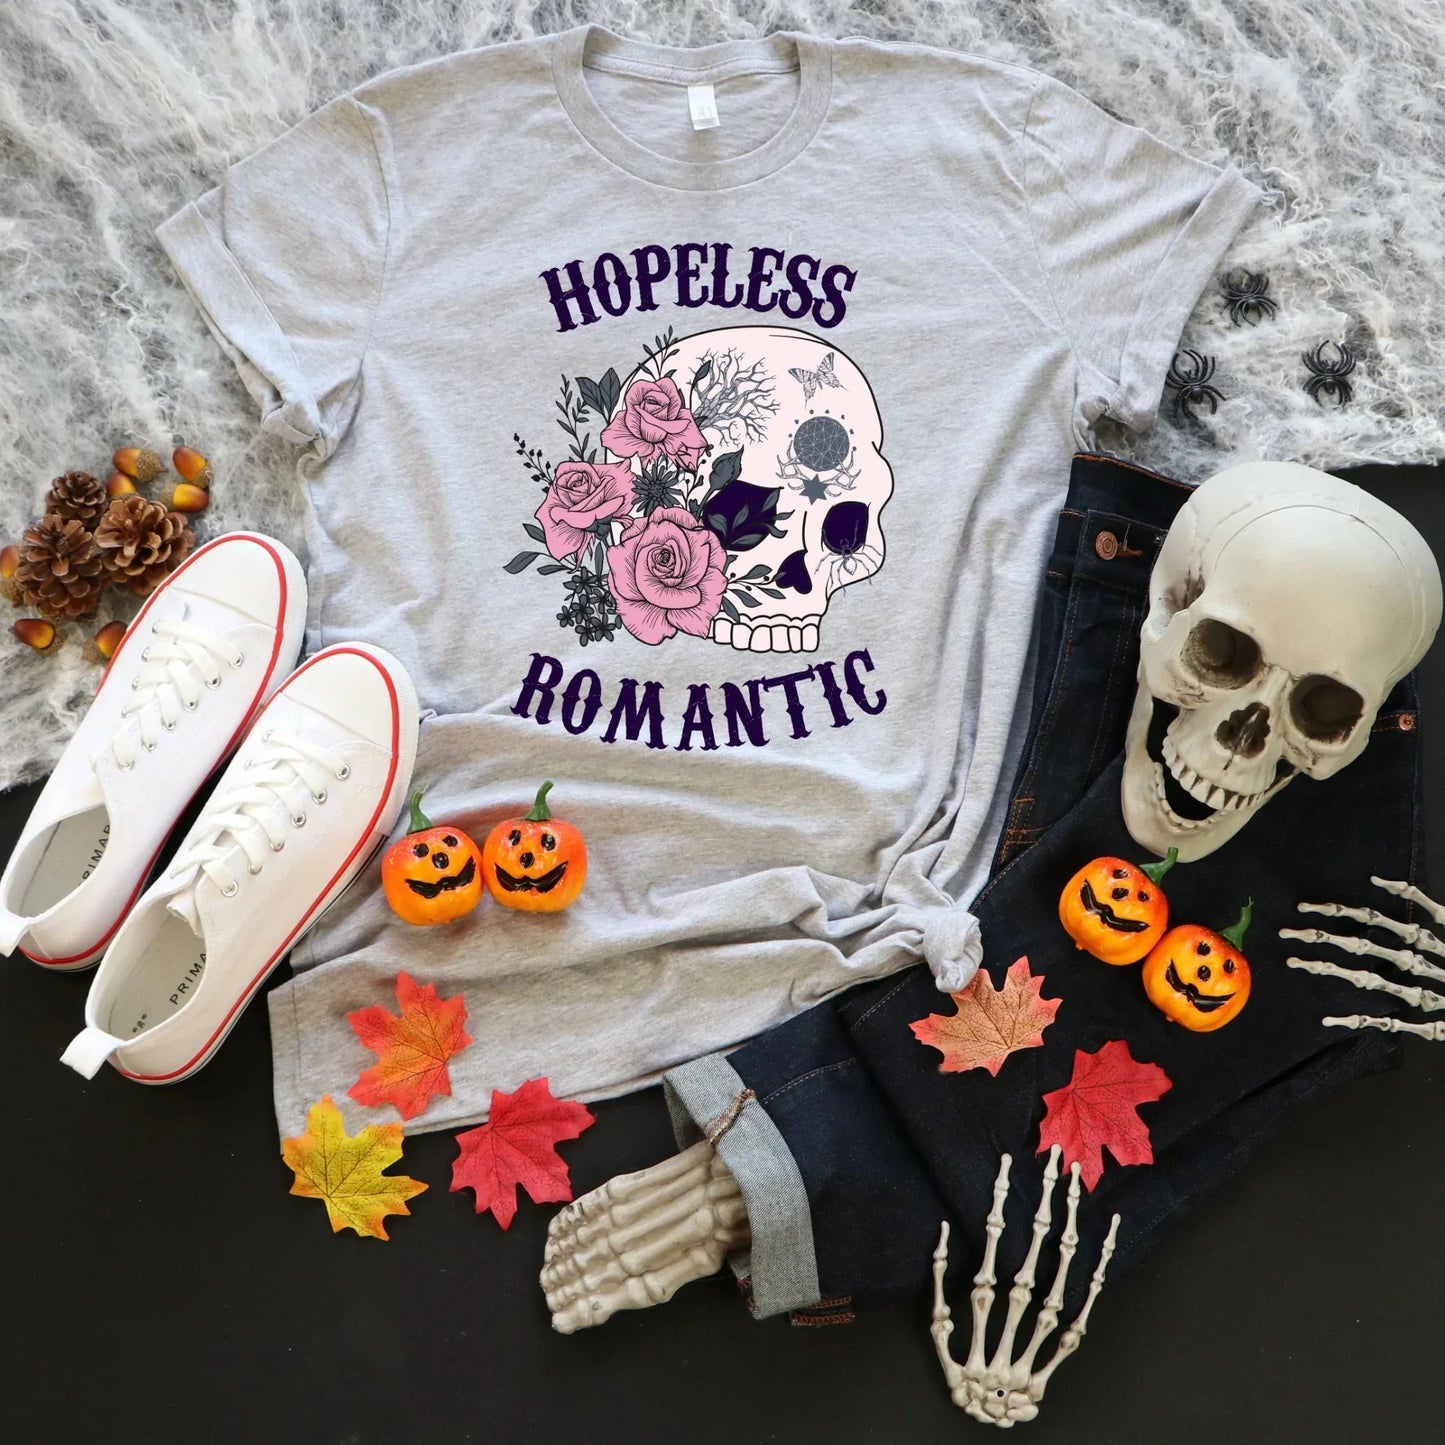 Gothic Shirt, Pastel Halloween Sweatshirt, Witchy Vibes, Skull Shirt Dead Roses Shirt, Magical Witch Shirt, Pastel Goth Style, EMO Tshirt HMDesignStudioUS